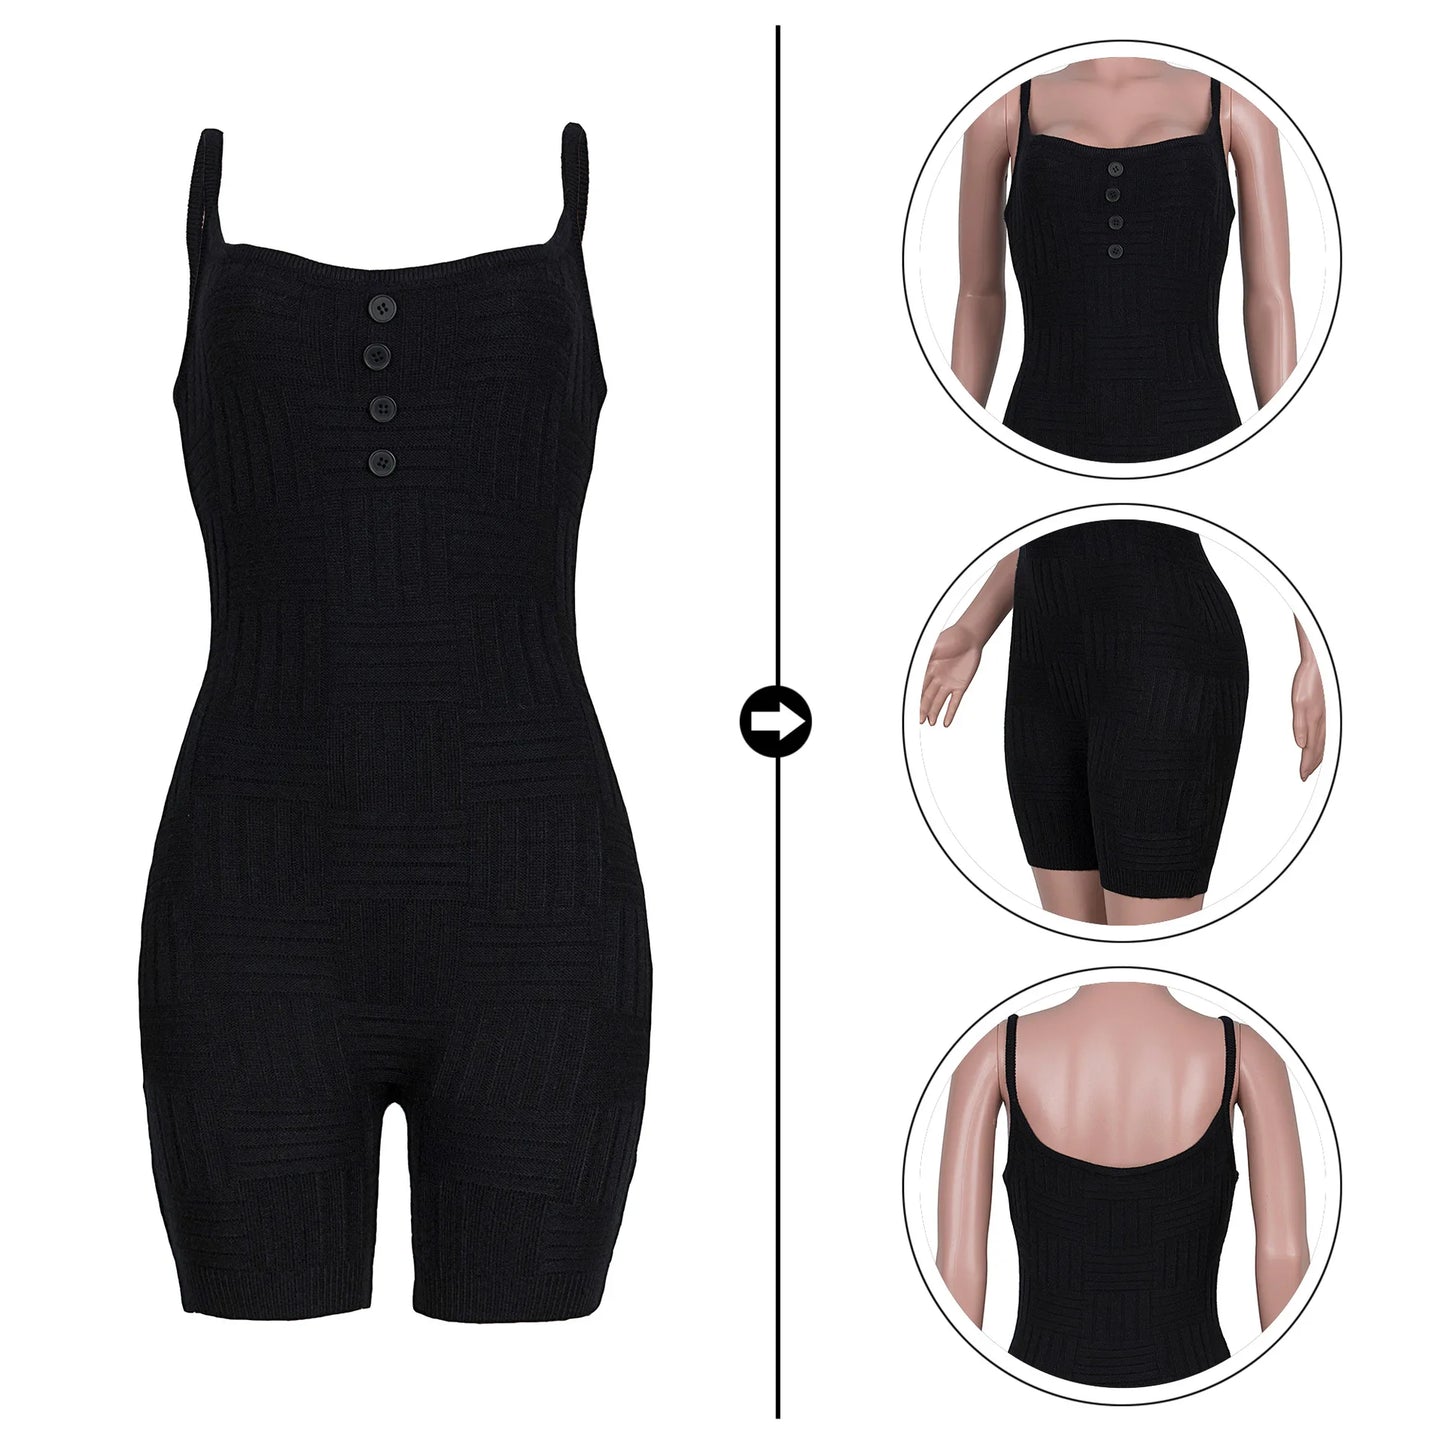 Woman Casual Summer Backless Romper Ladies Sexy Solid Color Breathable Sleeveless Suspenders One Piece Playsuits